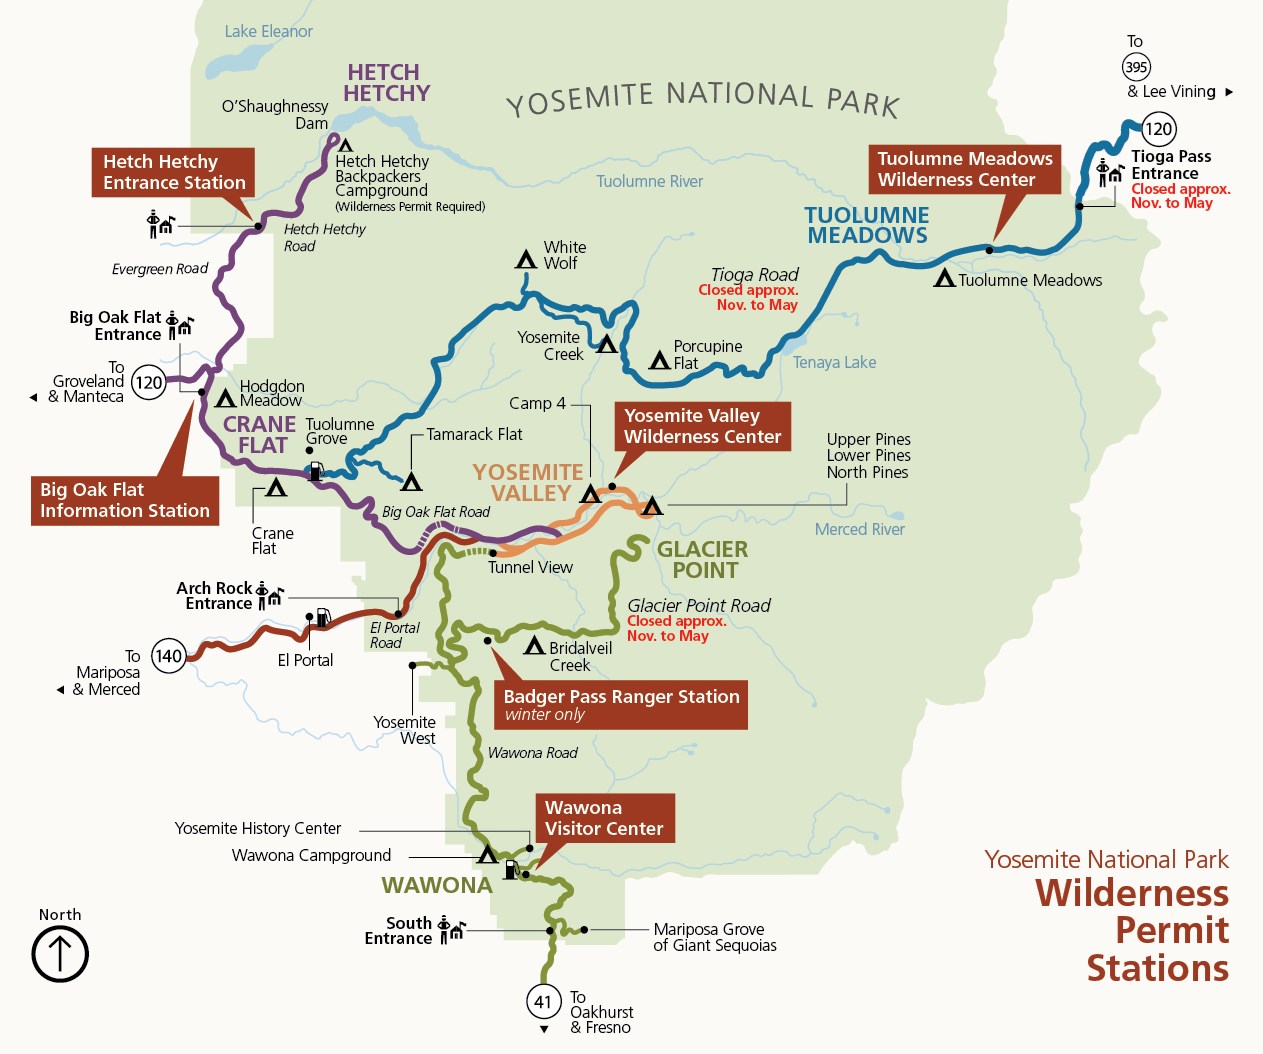 A map of Yosemite shows the locations of six permit stations: Yosemite Valley Wilderness Center, Tuolumne Meadows Wilderness Center, Wawona Visitor Center, Hetch Hetchy Entrance Station, Big Oak Flat Information Station, and Badger Pass Ranger Station.